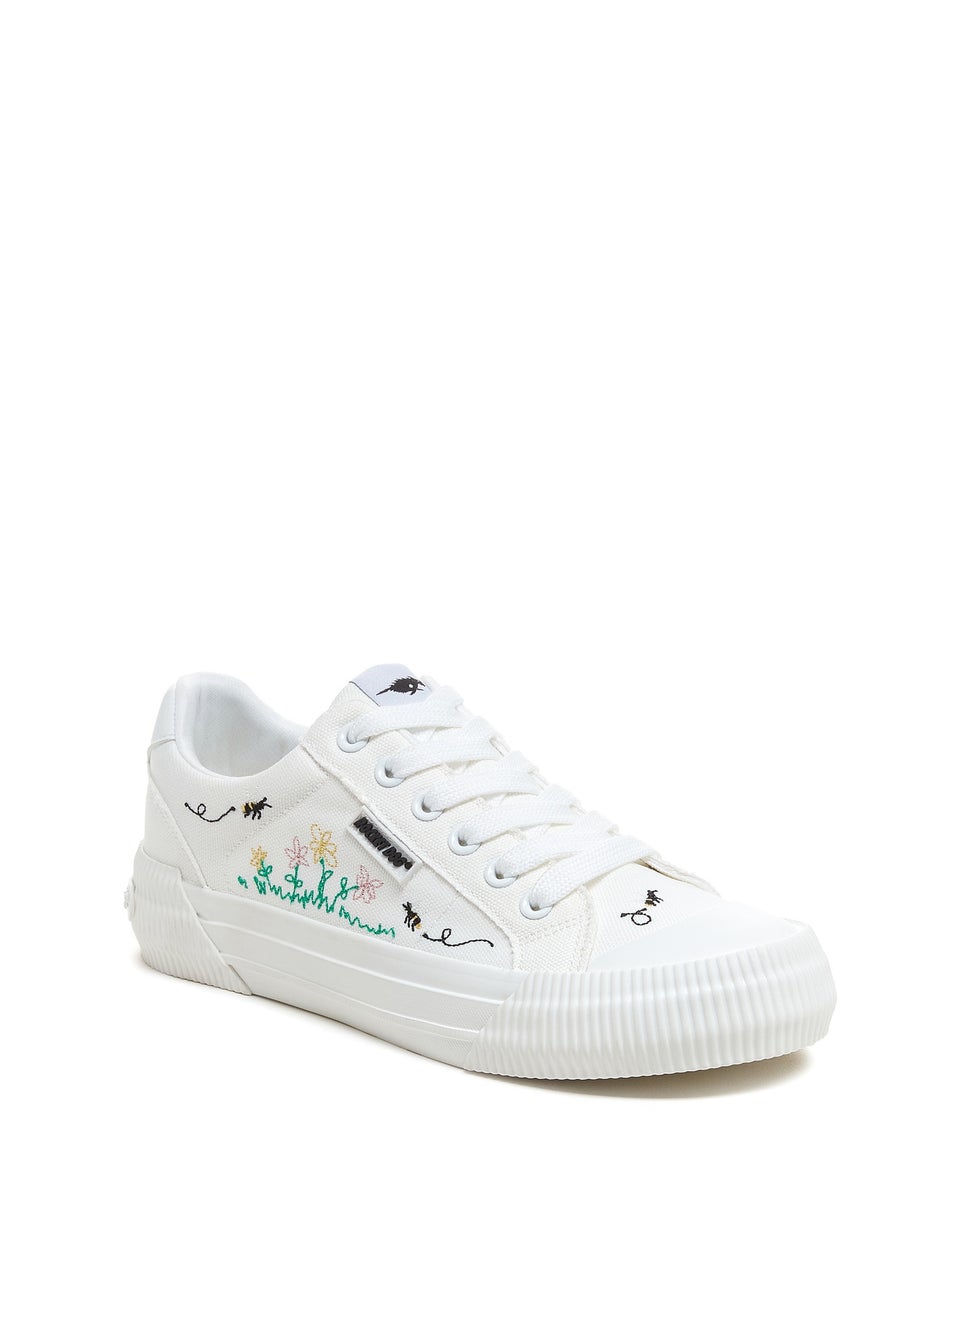 Rocket Dog White Cherry Embossed Trainers